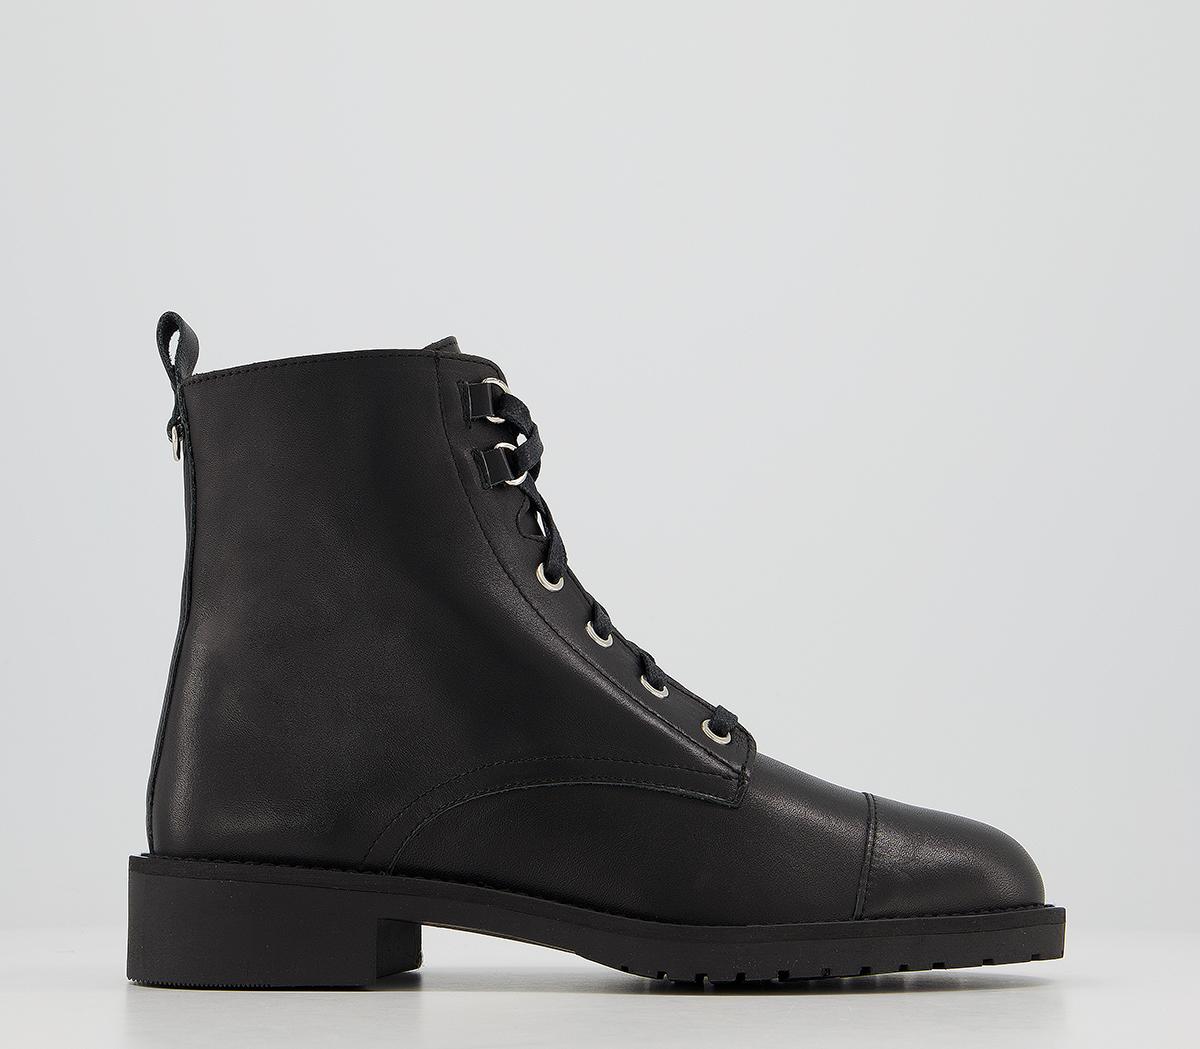 OFFICEAmbition Lace Up With Hardware BootsBlack Leather